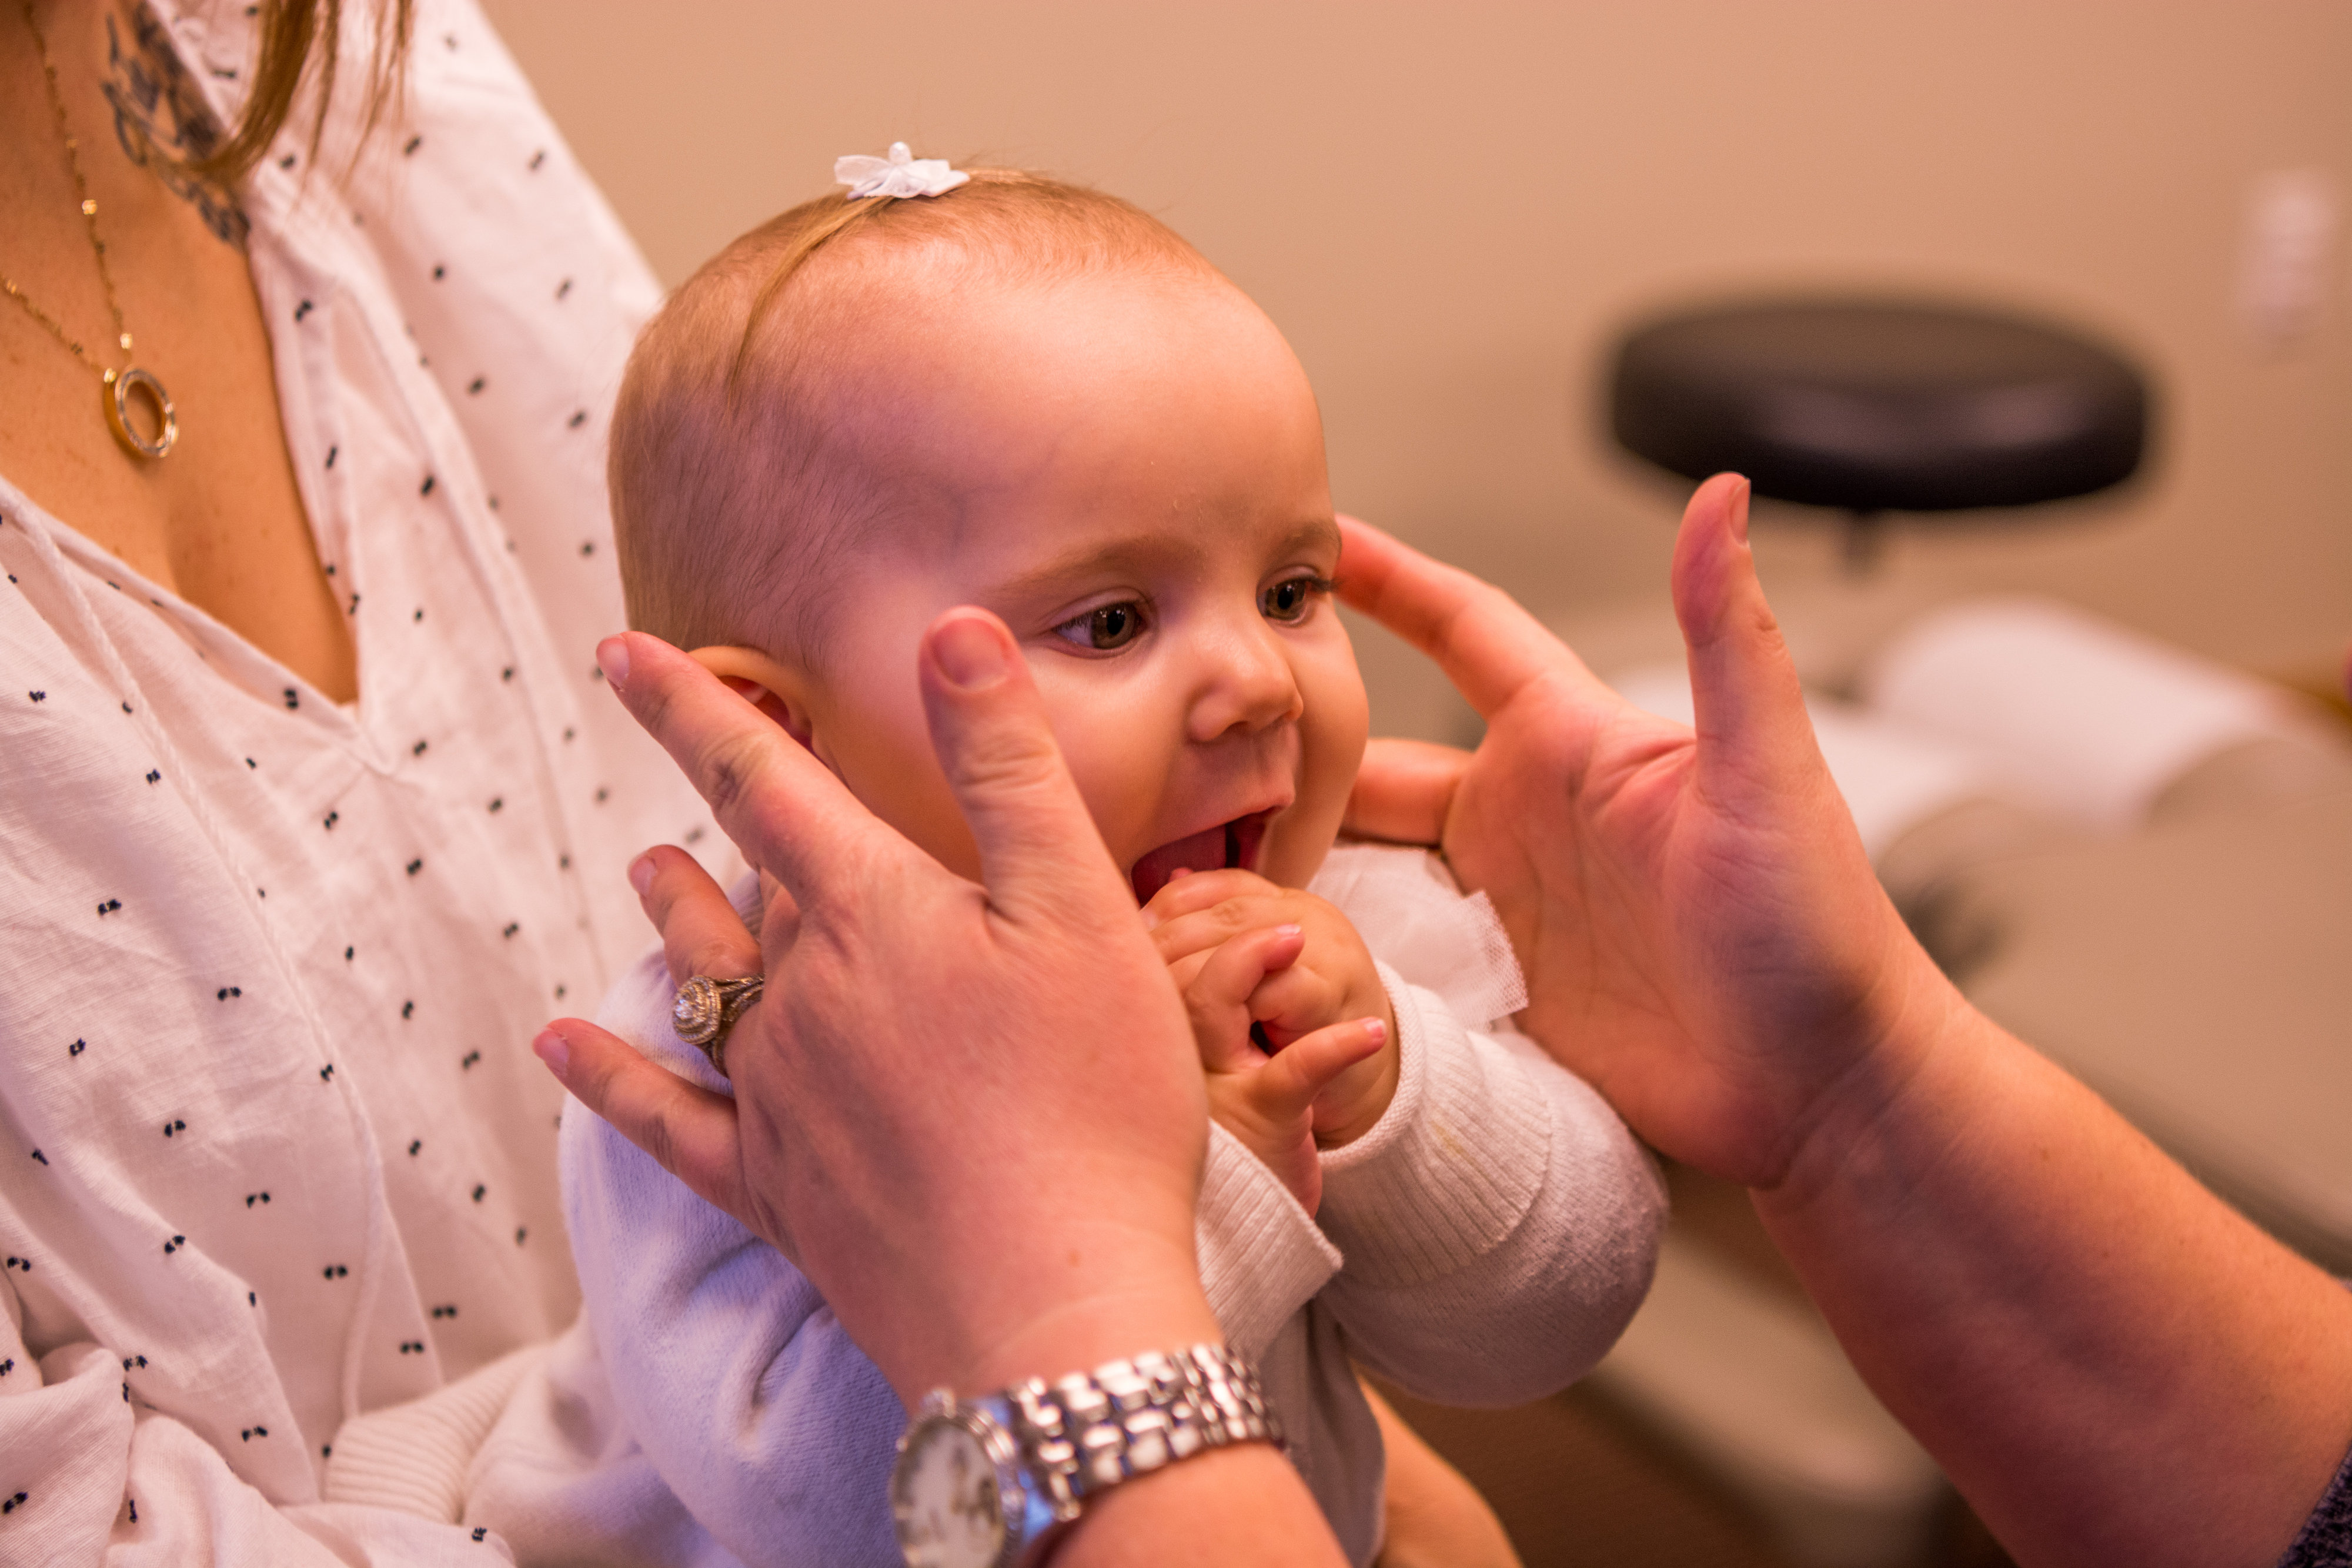 View More: http://dlindhardtphotography.pass.us/family-first-chiropractic